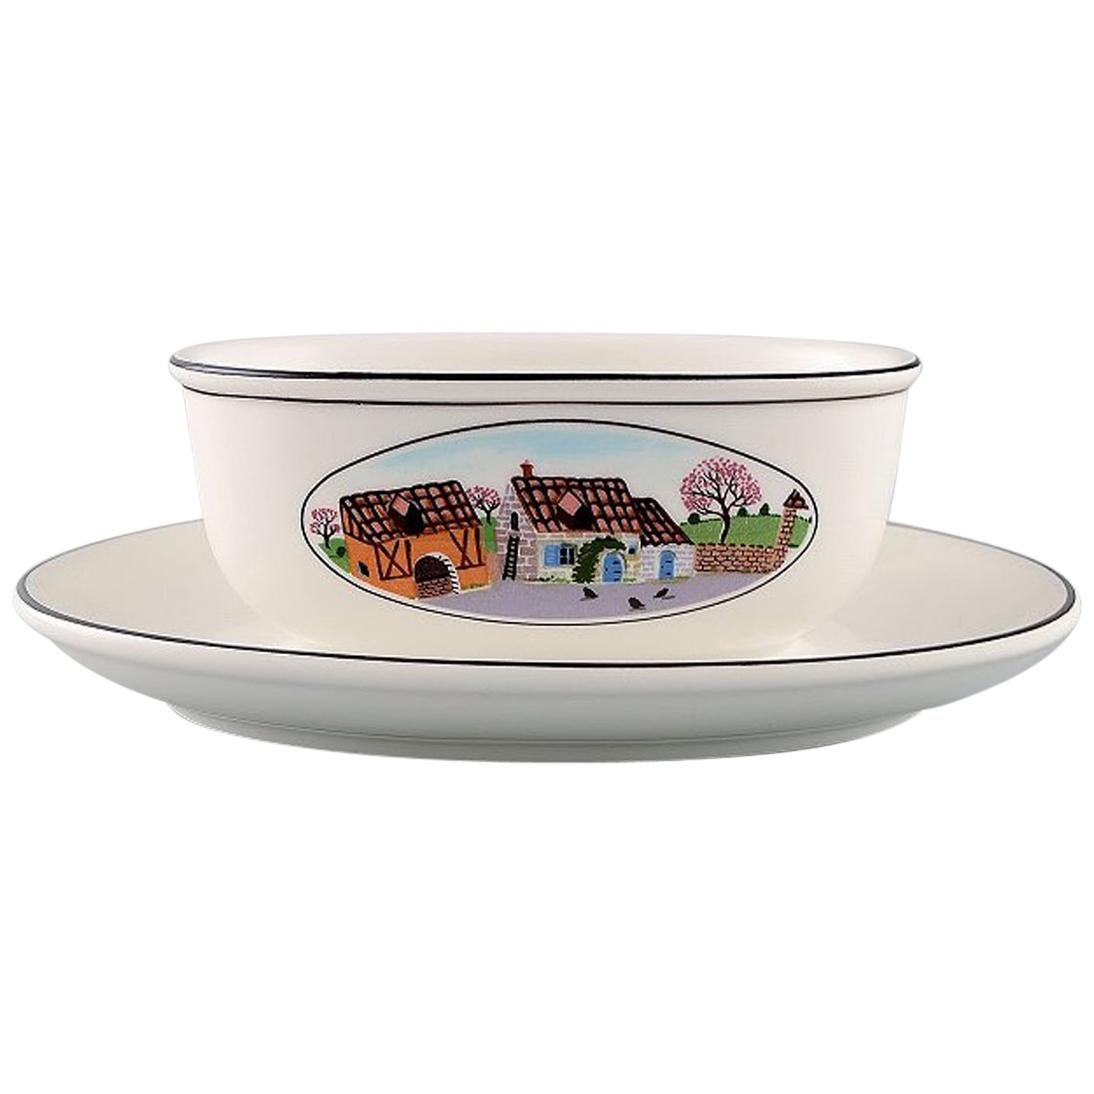 Villeroy & Boch Naif Gravy Boat on Stand in Porcelain